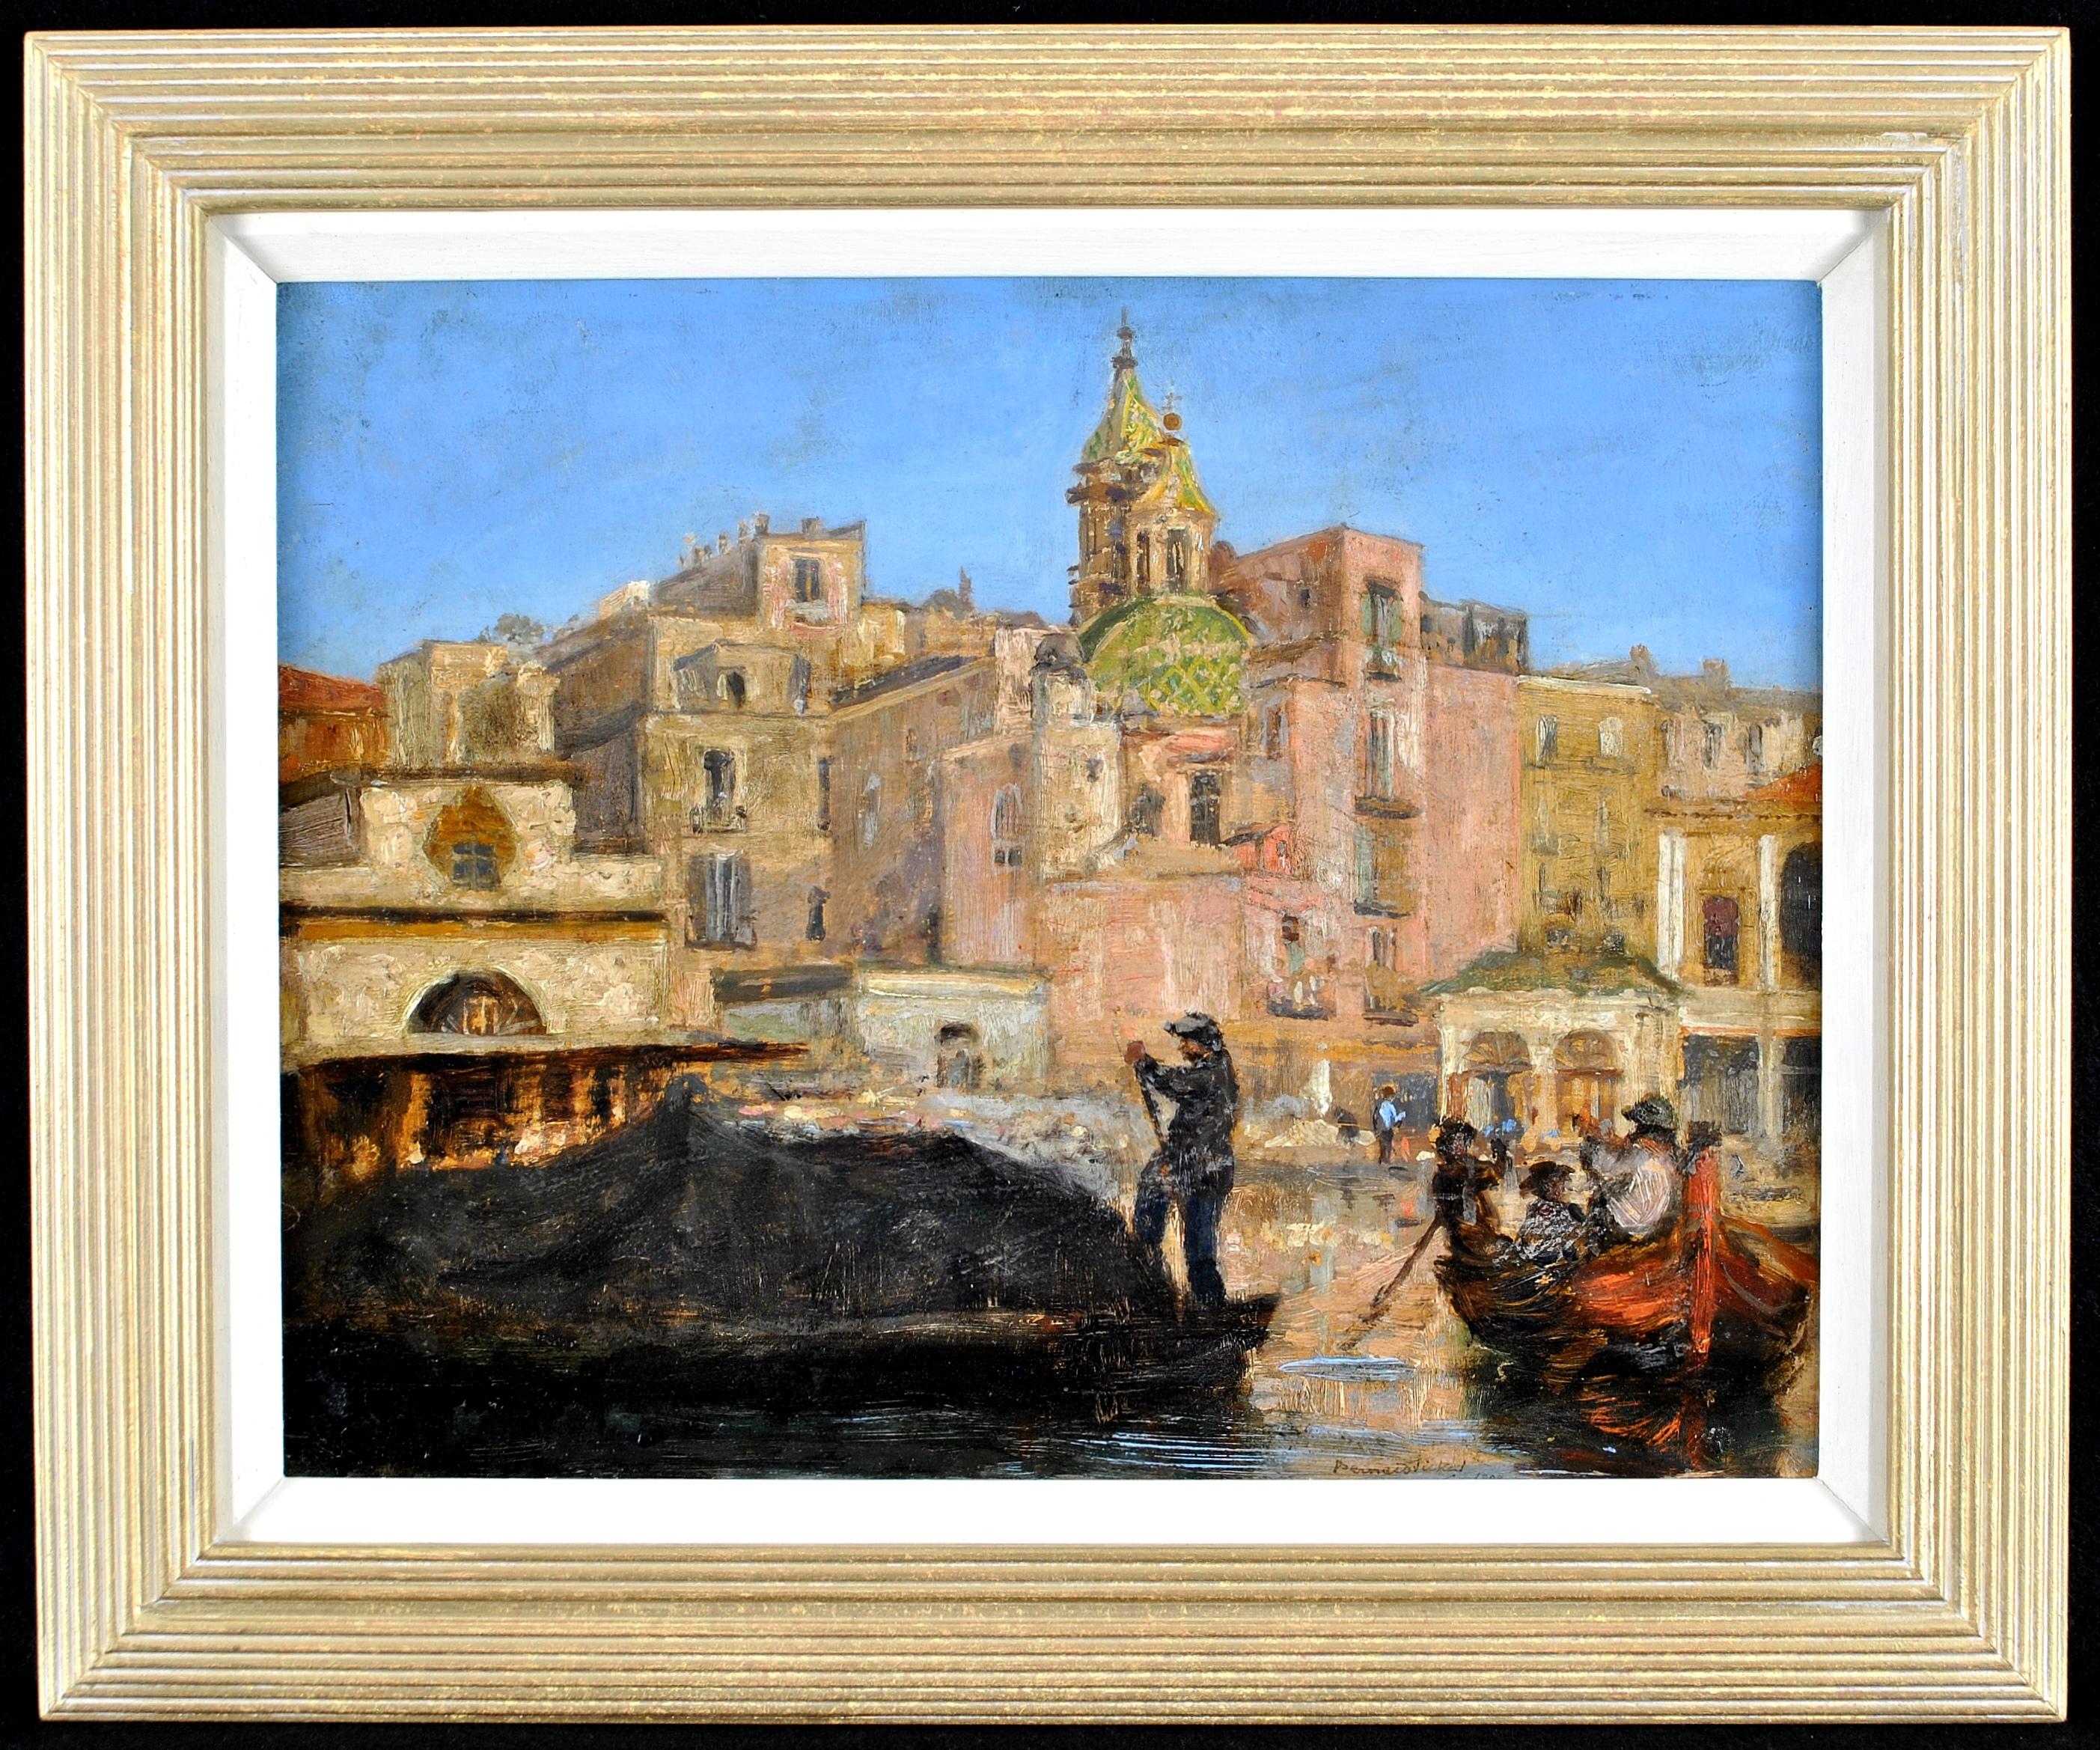 A beautiful signed and dated 1905 oil on panel depicting The Custom House in Naples by the important Modern British artist Bernard Sickert.

Artist: Bernard Sickert (British, 1863-1932)
Title: The Custom House, Naples
Medium: Oil on panel
Size: 17 x